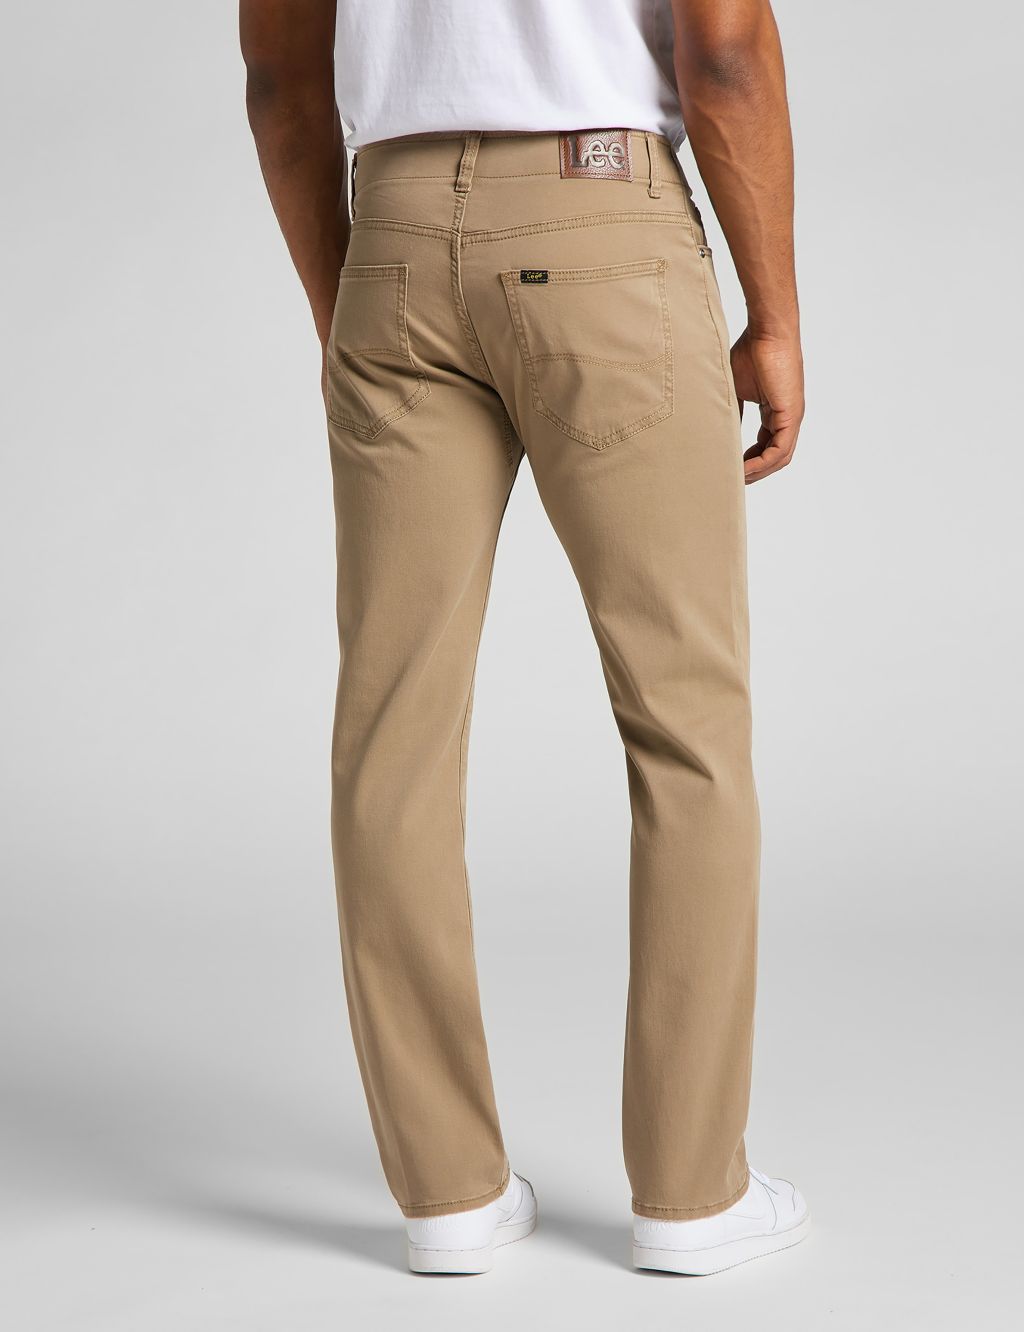 Straight Fit 5 Pocket Trousers image 3